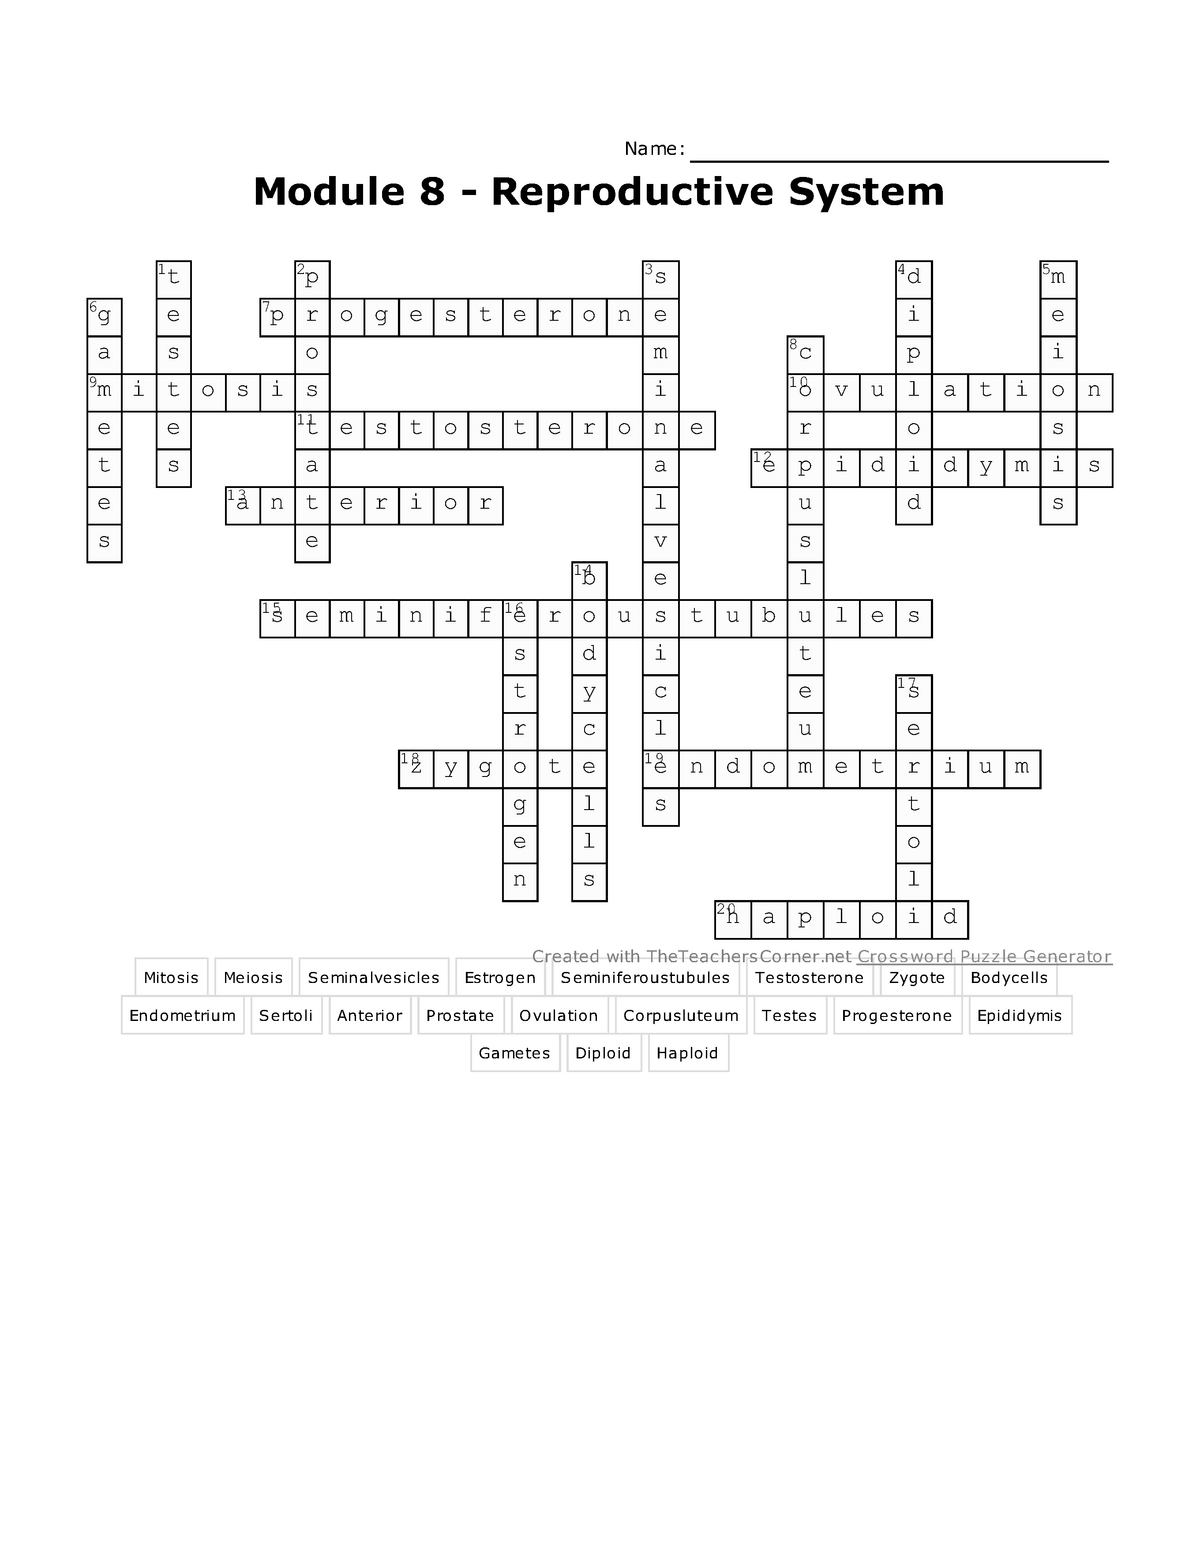 Module 8 Reproductive System Crossword Answers Name Module 8 Reproductive System 1 2 T 6